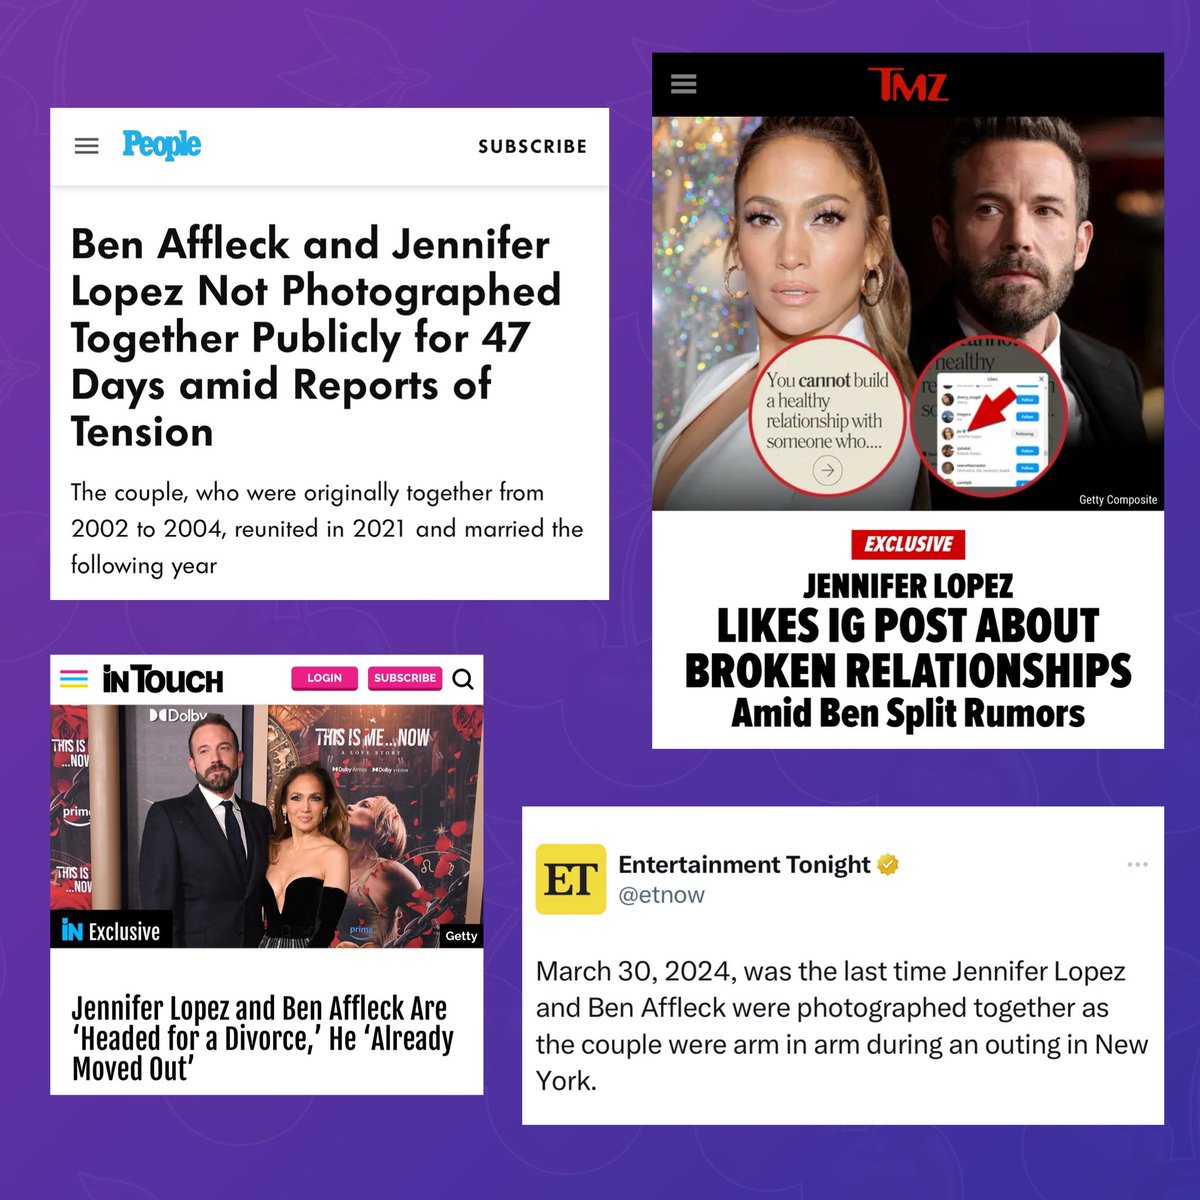 Jennifer Lopez and Ben Affleck trend amid divorce rumors from news outlets and internet speculation about them not being photographed together in 47 days.